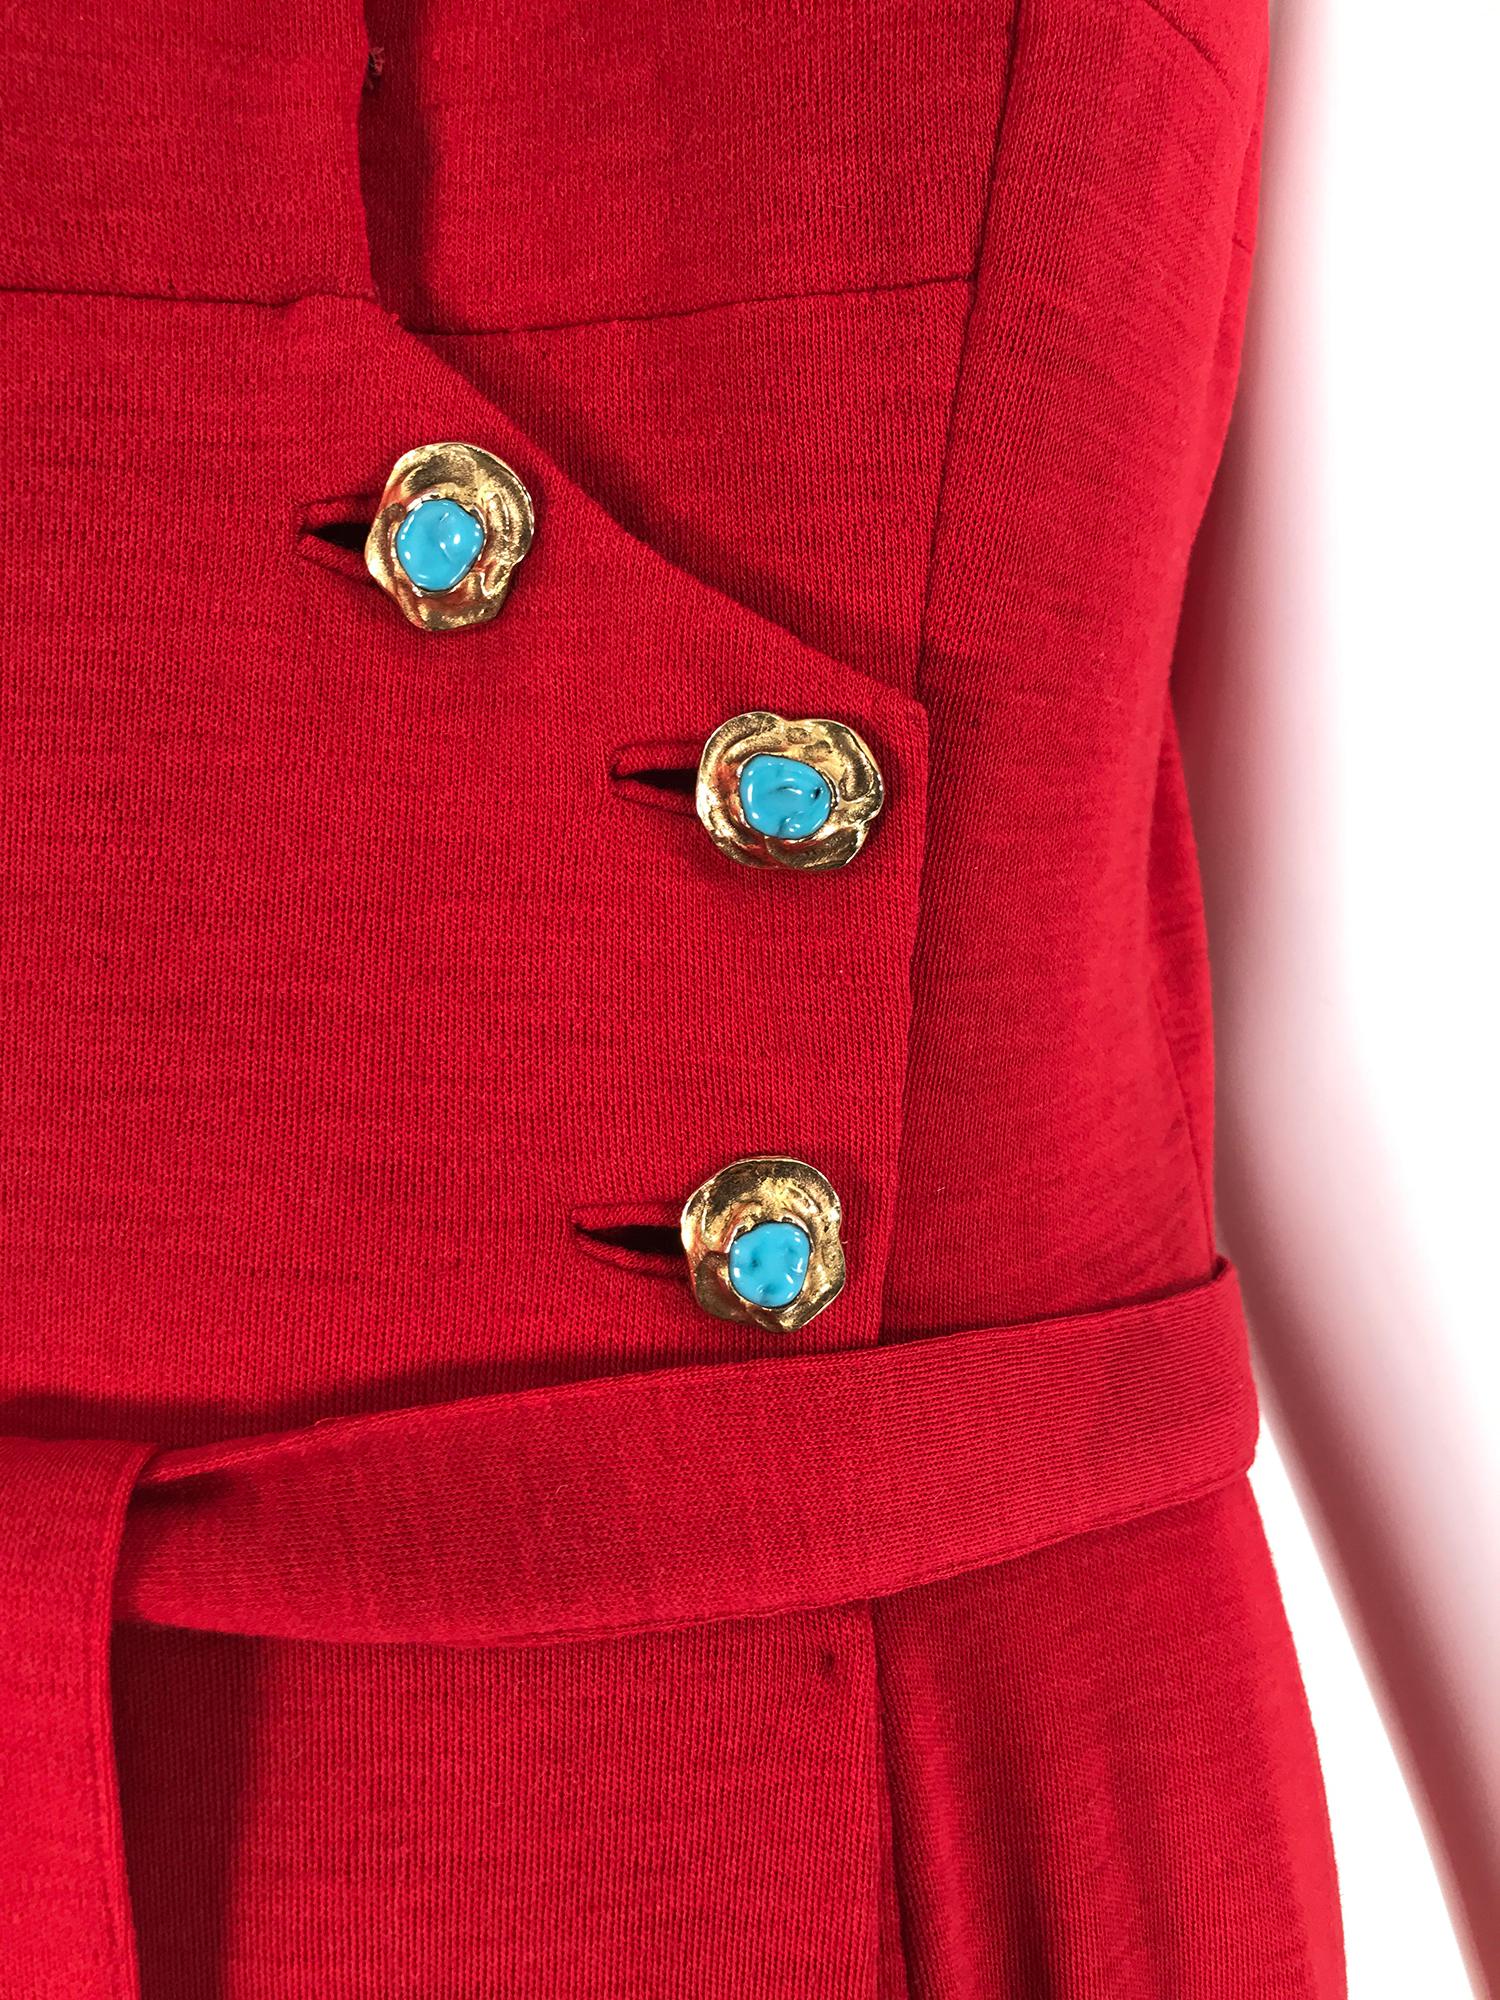 Coco Chanel Red Haute Couture 1950s 2 pc Wool Jersey Jewel Button Dress & Coat  For Sale 3